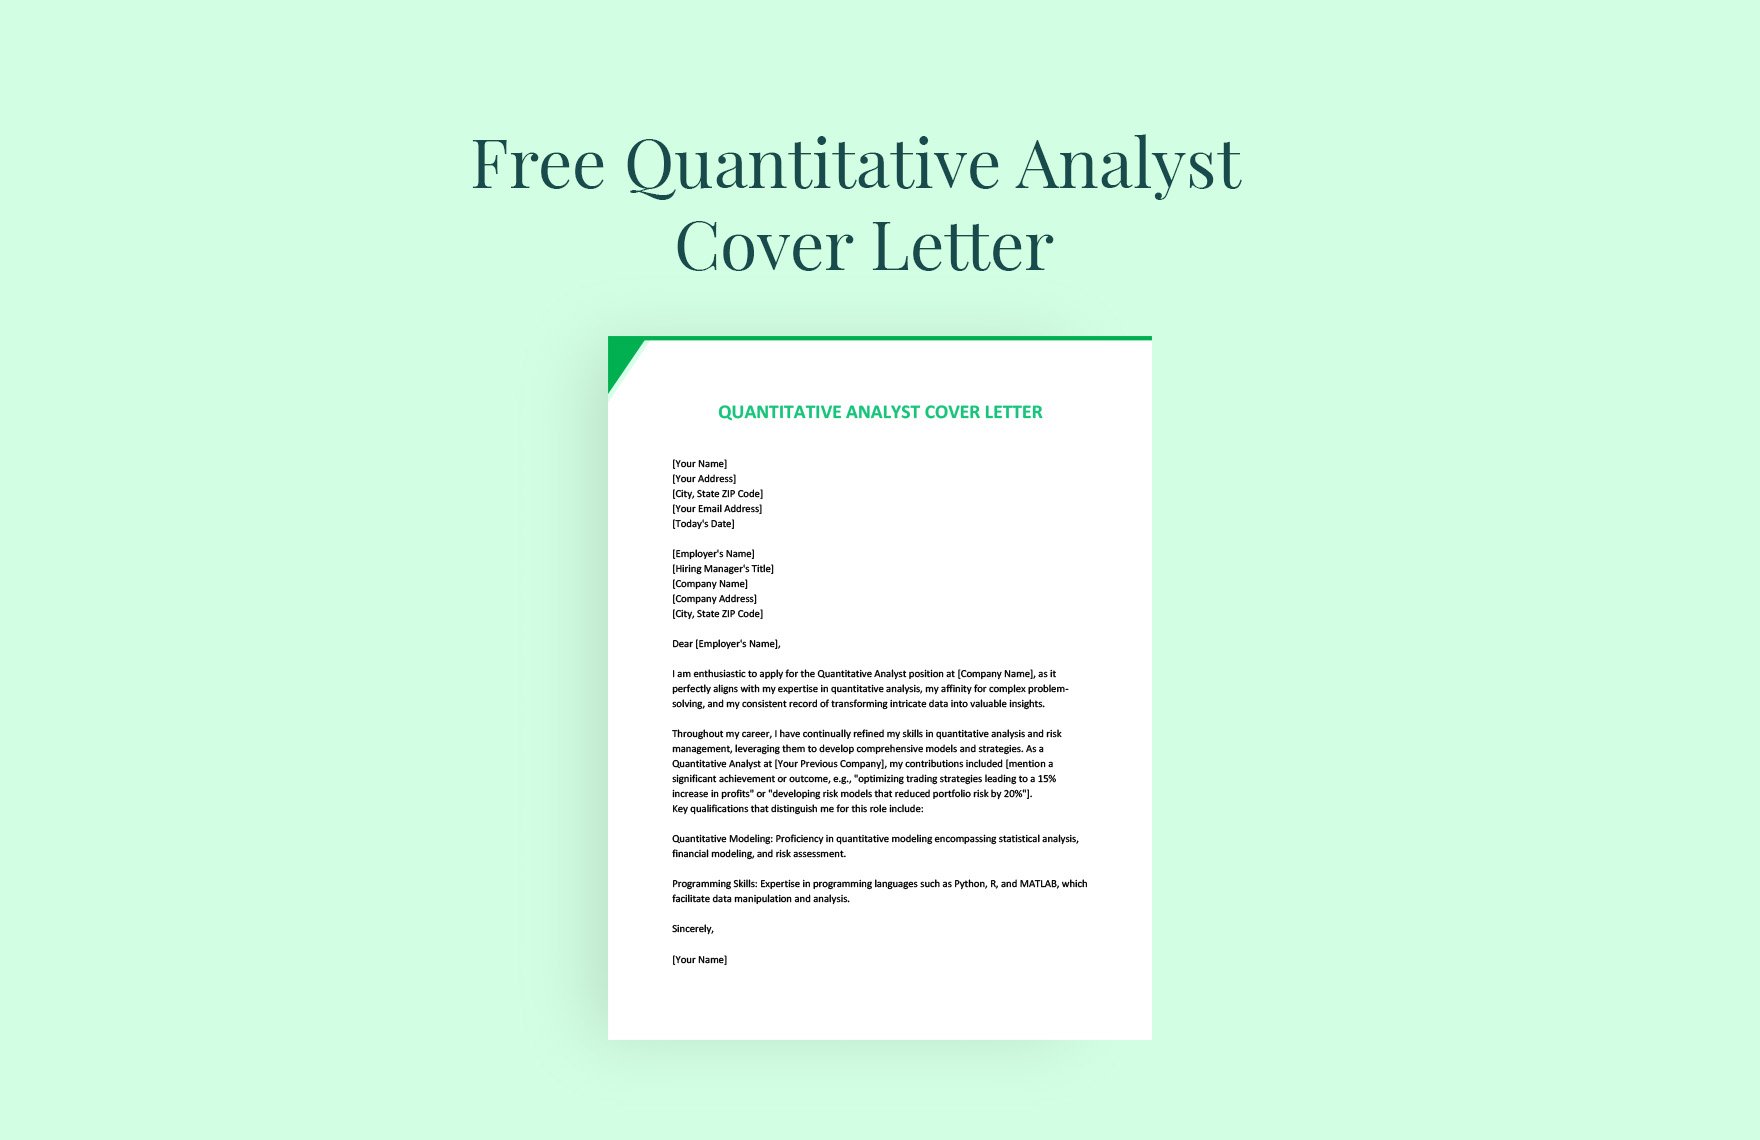 Quantitative Analyst Cover Letter in Word, Google Docs